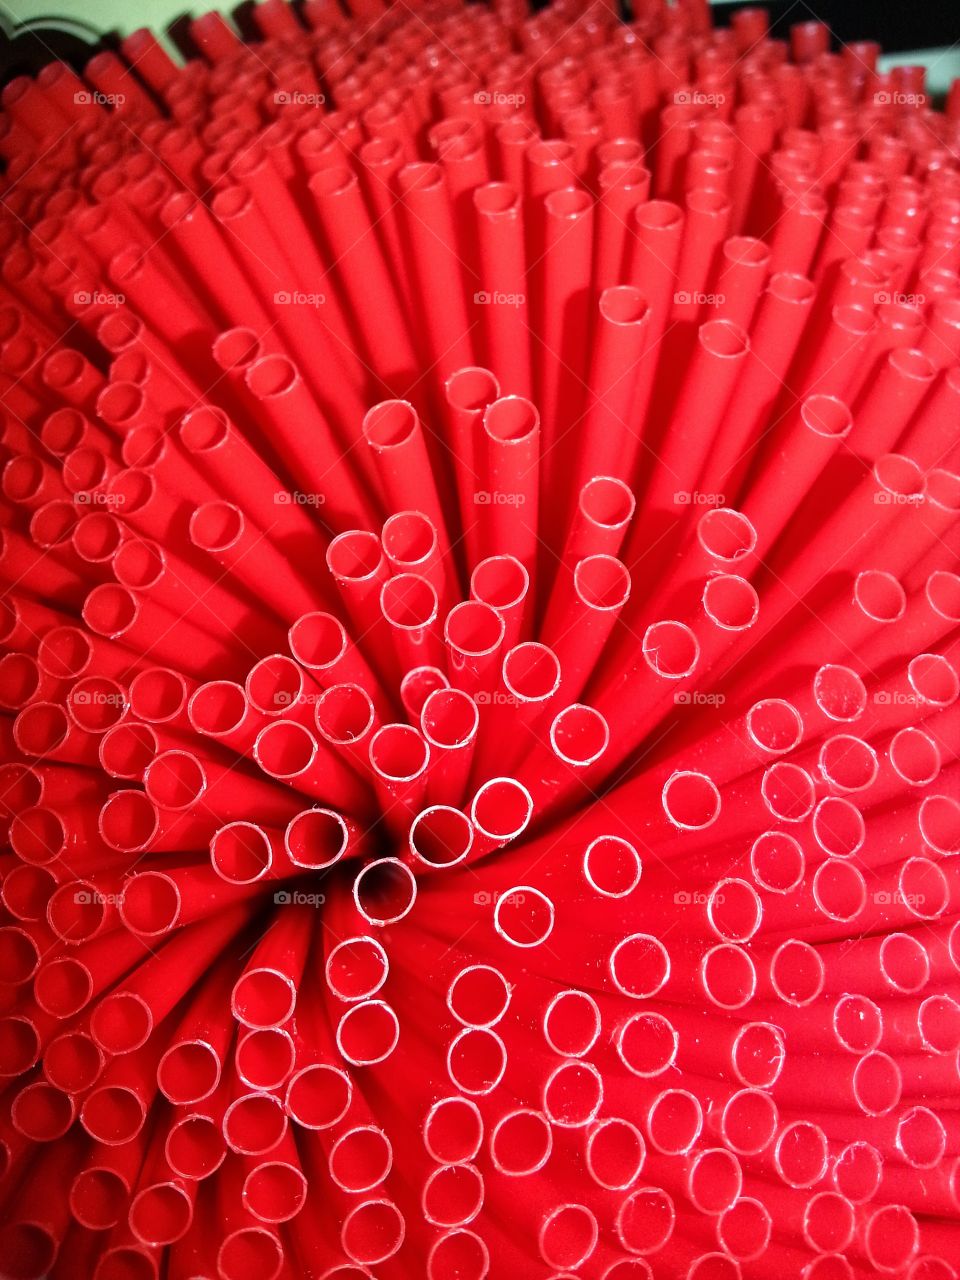 Red Straws. I took a picture of a bunch of red straws together